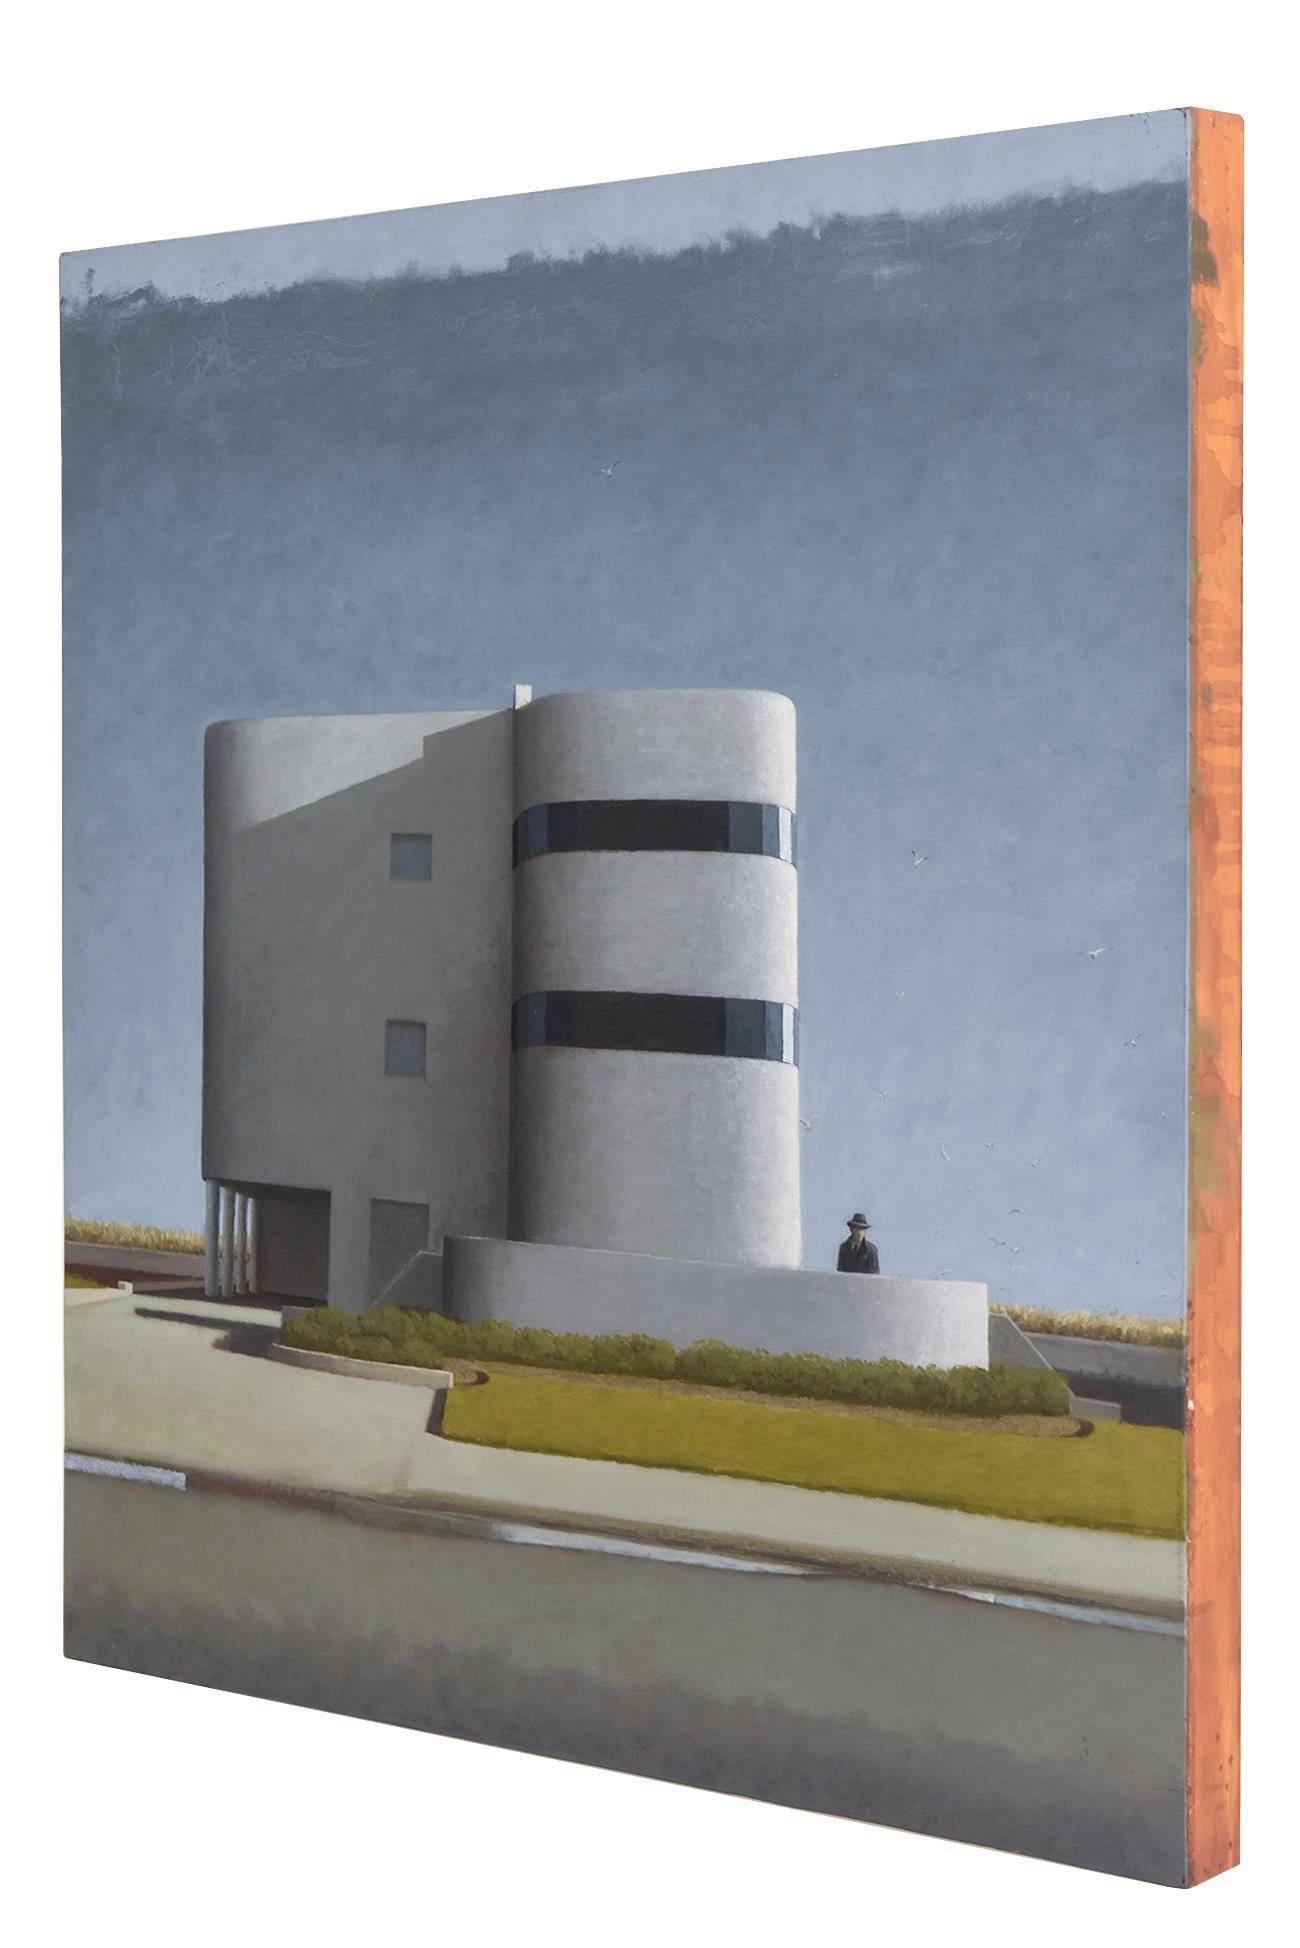 This large signed acrylic on wood painting by Walsh from 2012 is titled Watching the Detective. He was a professor of painting college level. It is eerie, captivating with open range scenery and a lone building standing. it is not framed but would